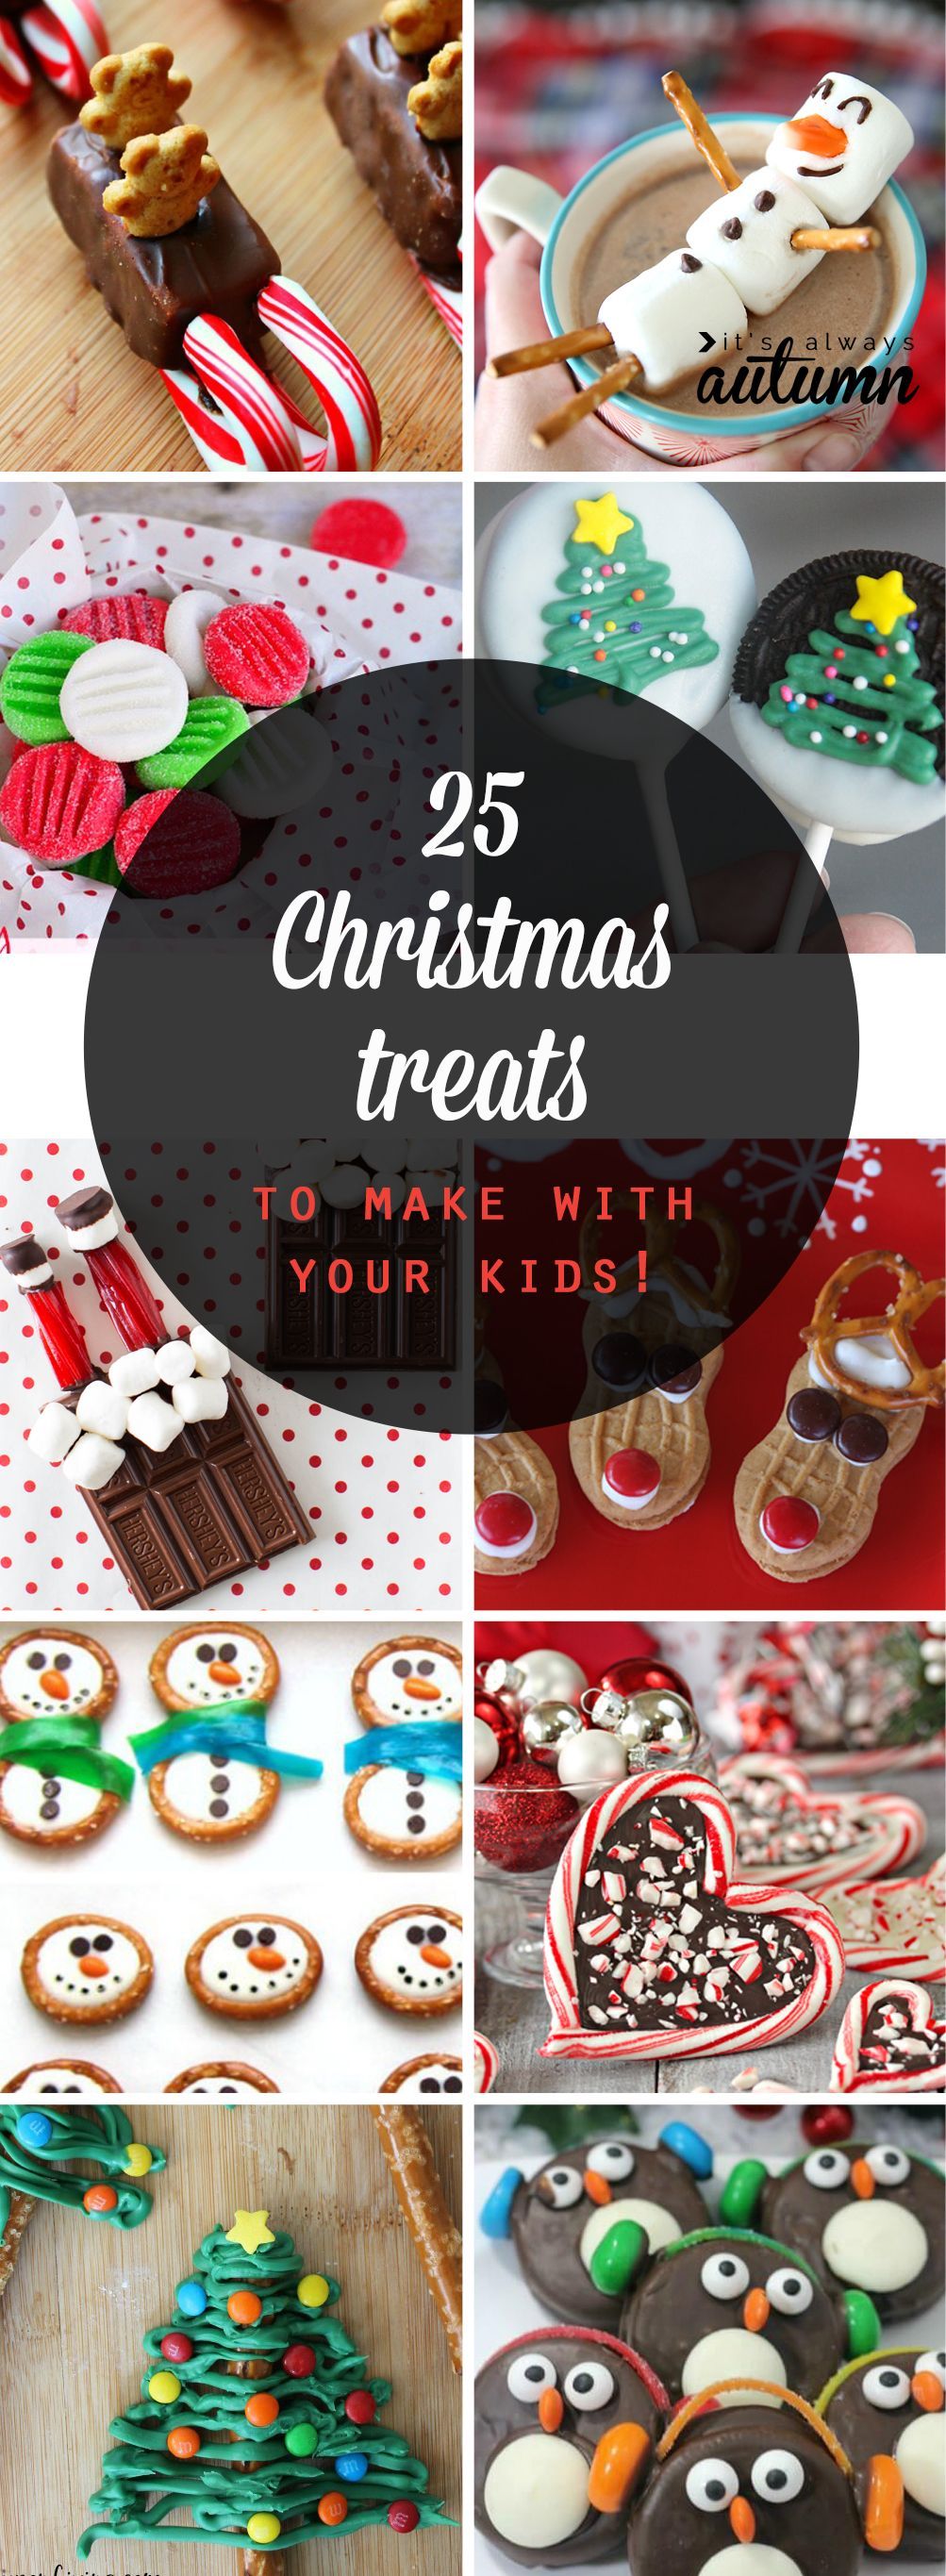 25 adorable Christmas treats to make with your kids - It's Always Autumn - 25 adorable Christmas treats to make with your kids - It's Always Autumn -   24 xmas food easy diy ideas